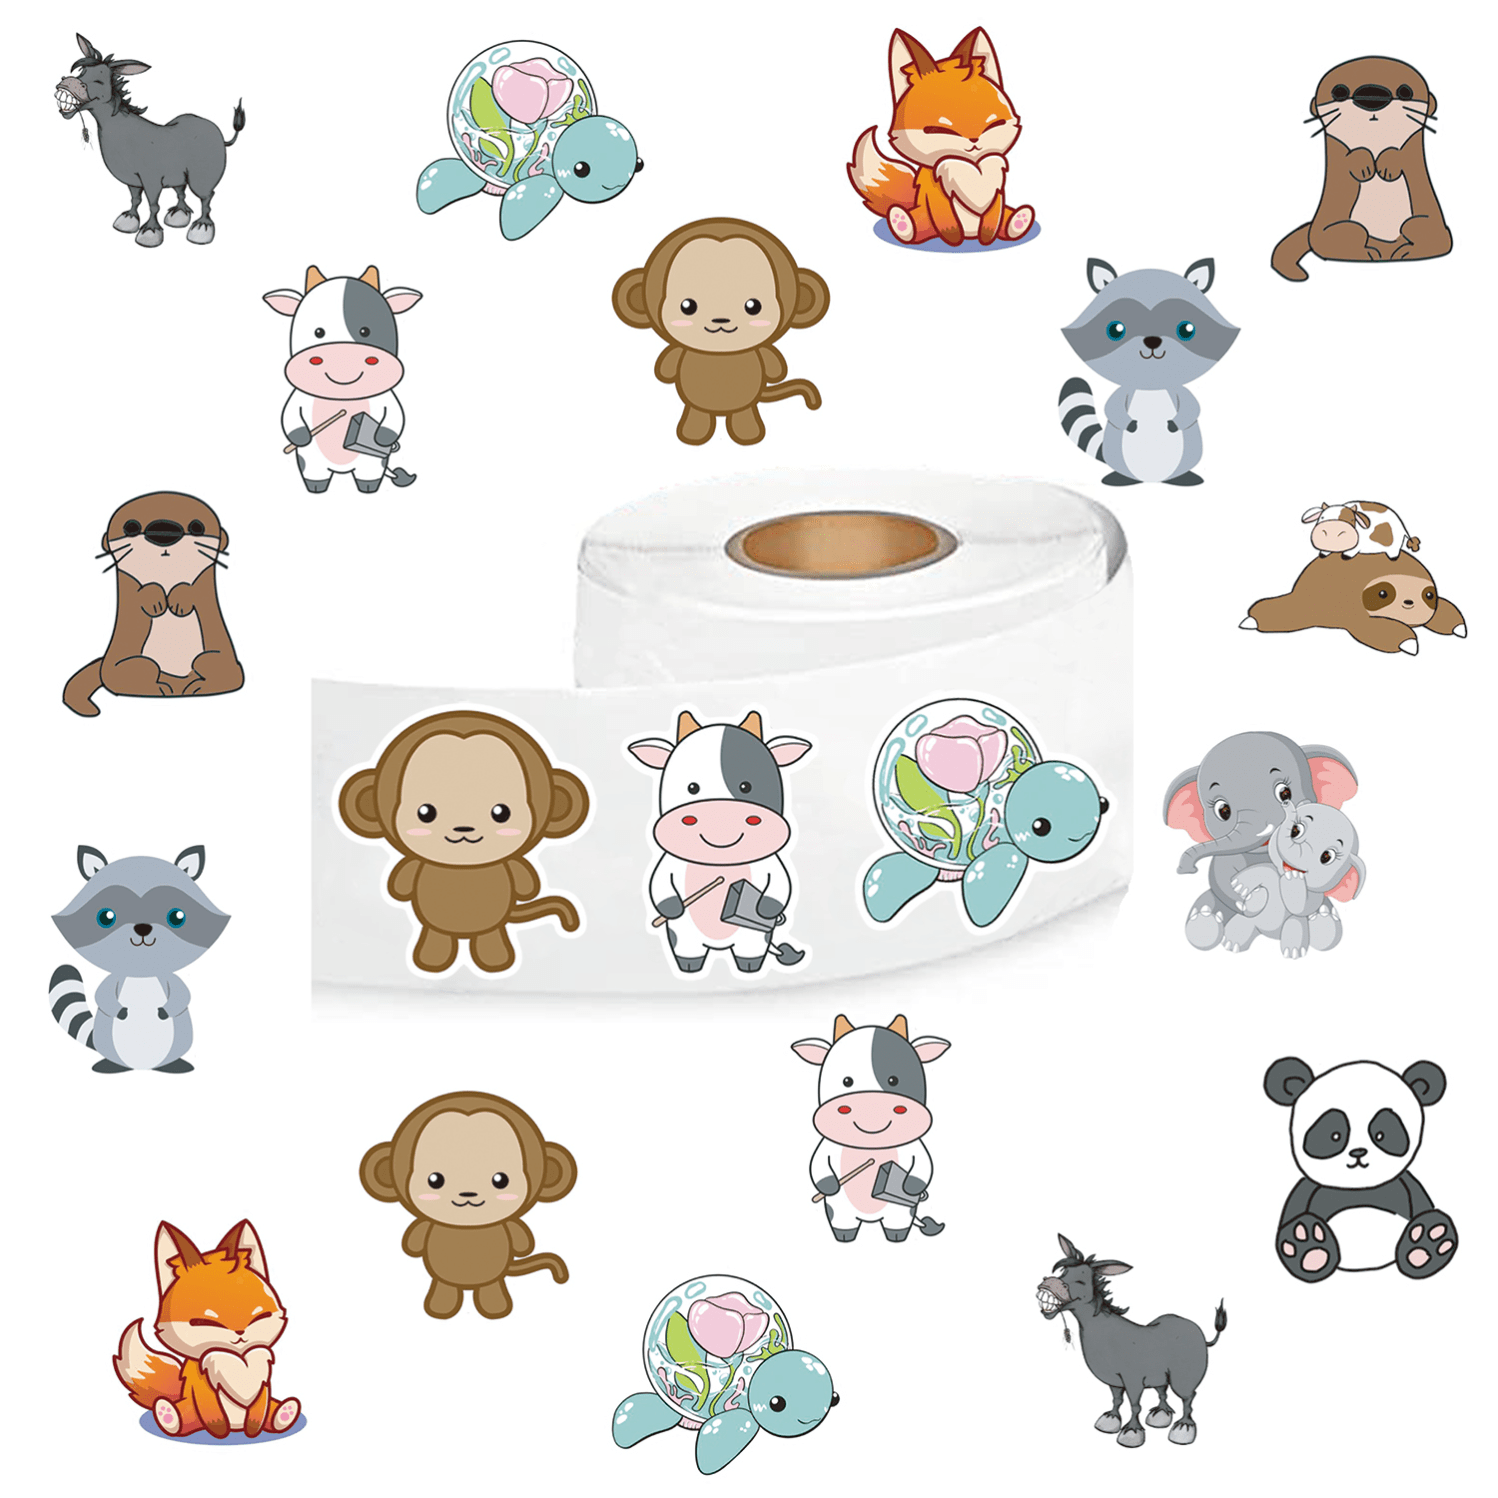 

500pcs Cute Cartoon Animal Stickers, Aesthetic Decals Rolls Self Adhesive Seals For Scrapbooking Cards Envelopes Handmade, Gifts For Teens Adults Party Supply (1 Inch Labels/ 10 Patterns)